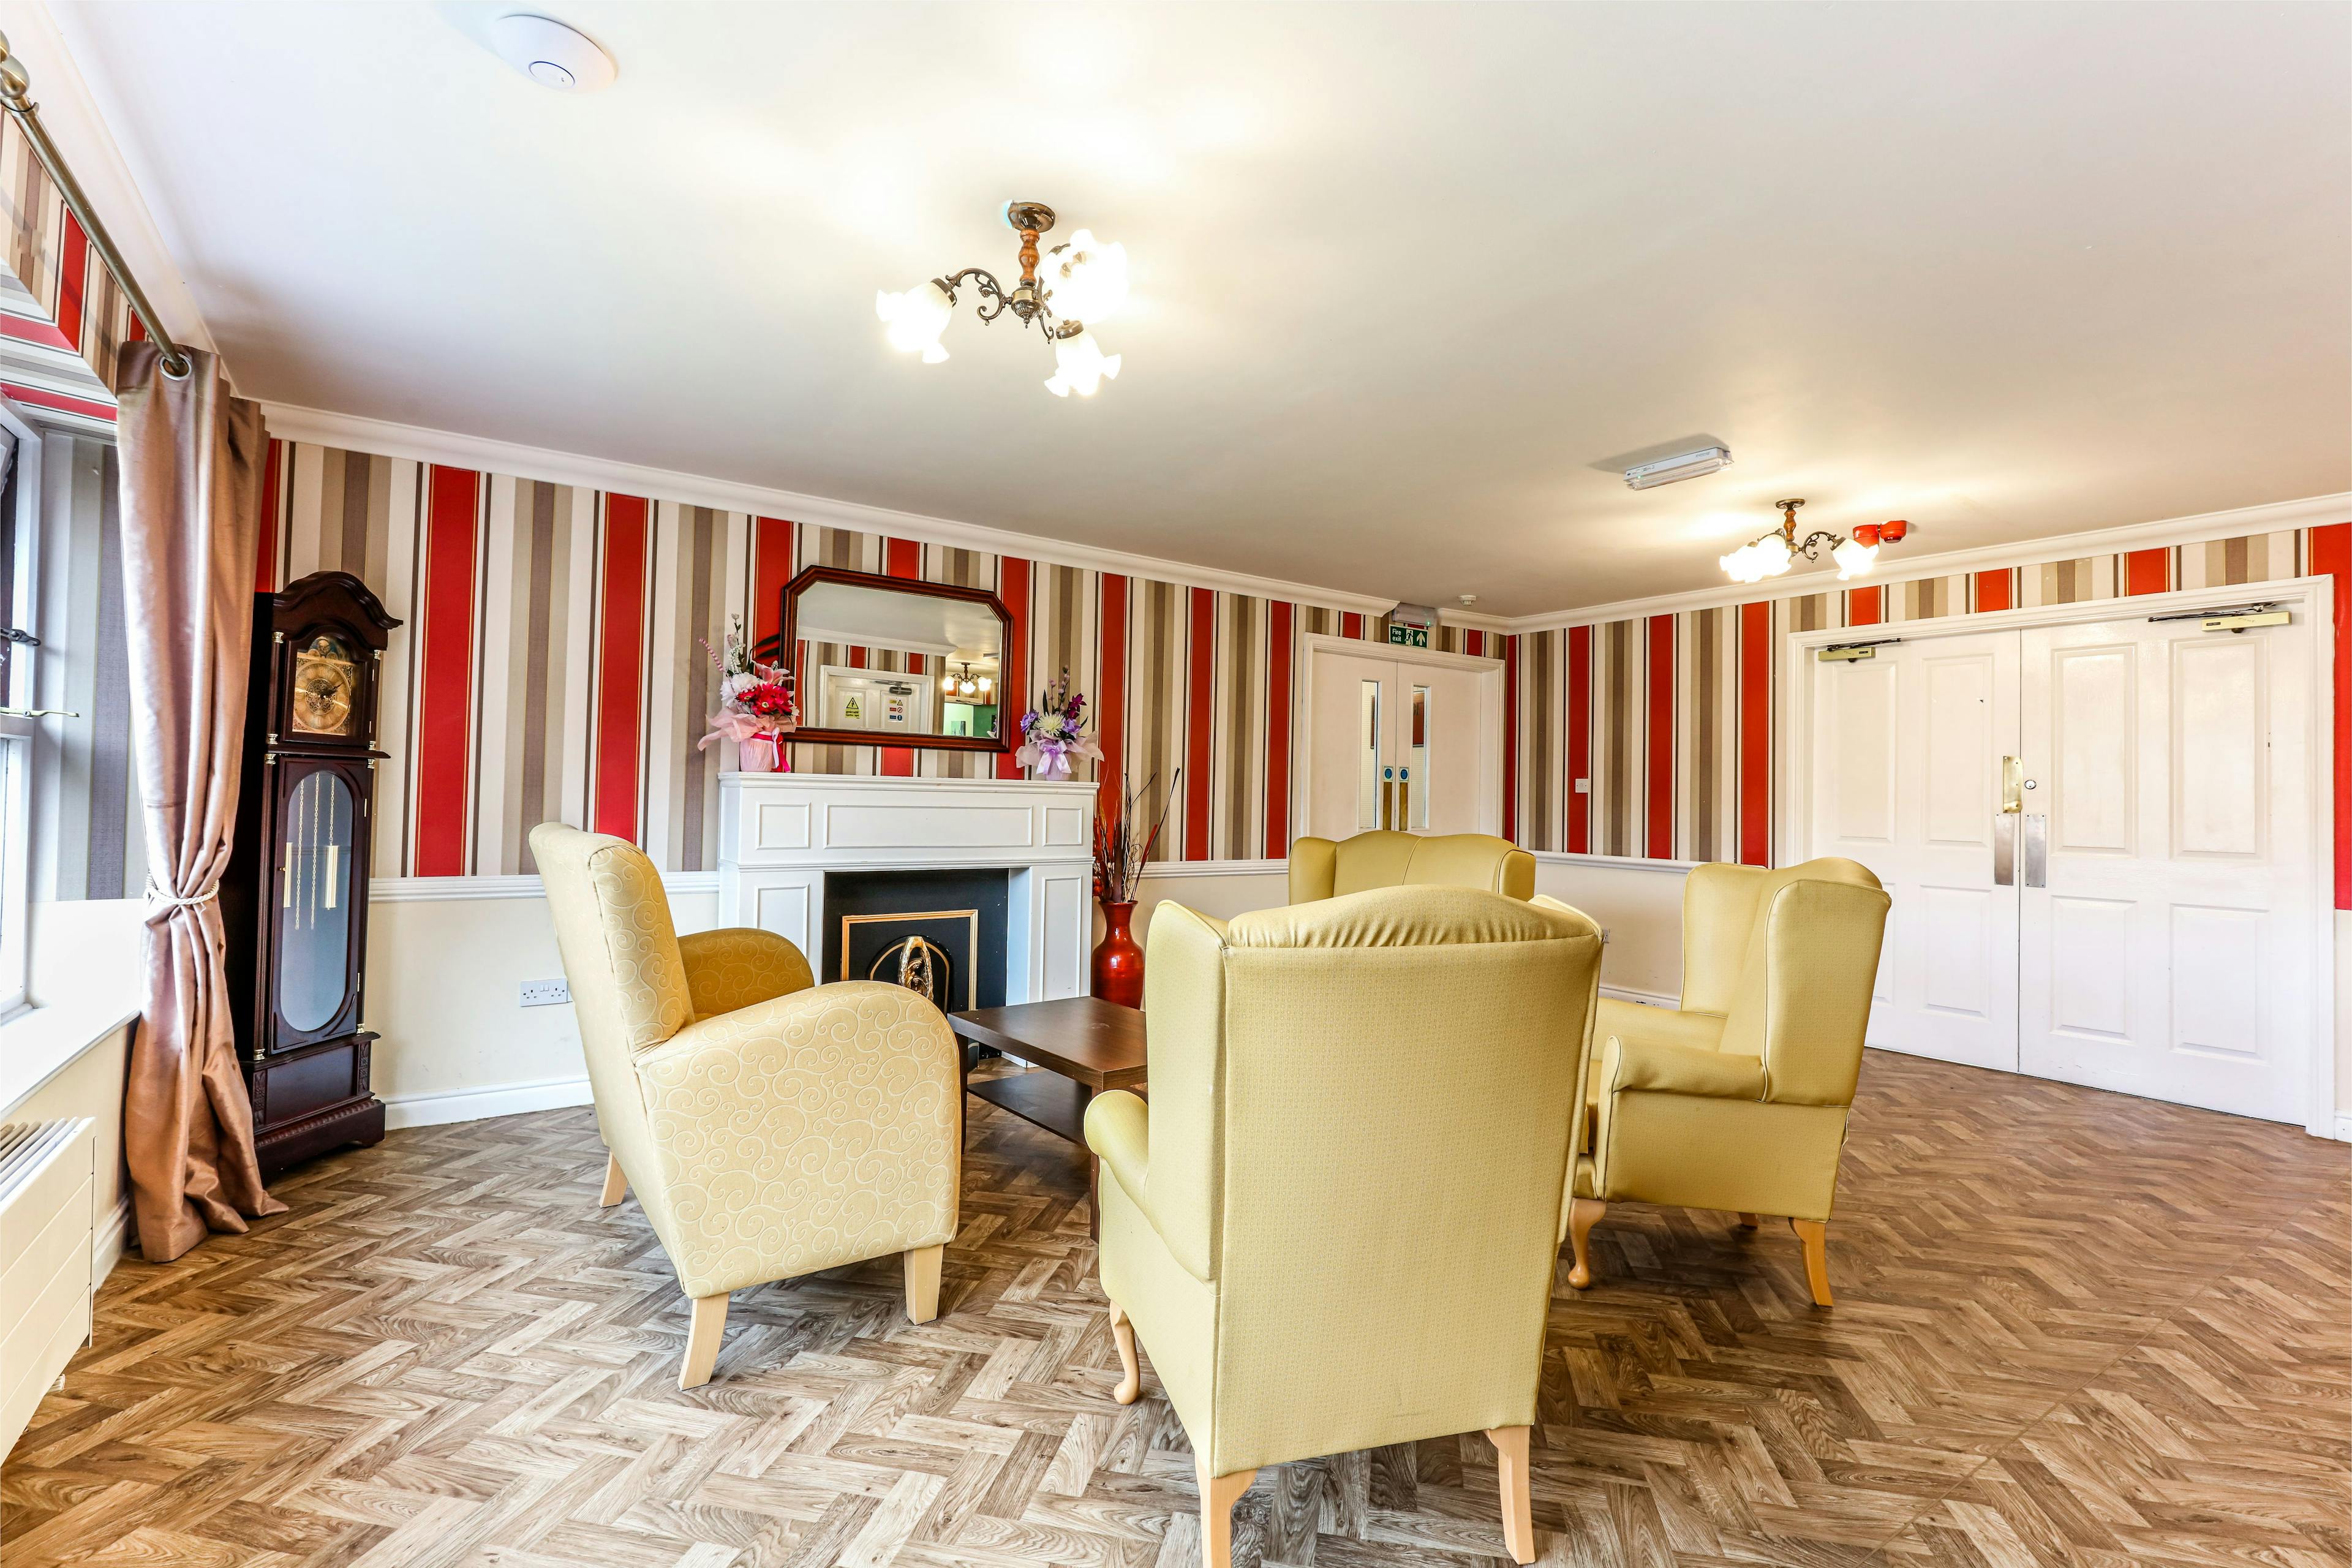 Minster Care Group - Grays Court care home 7